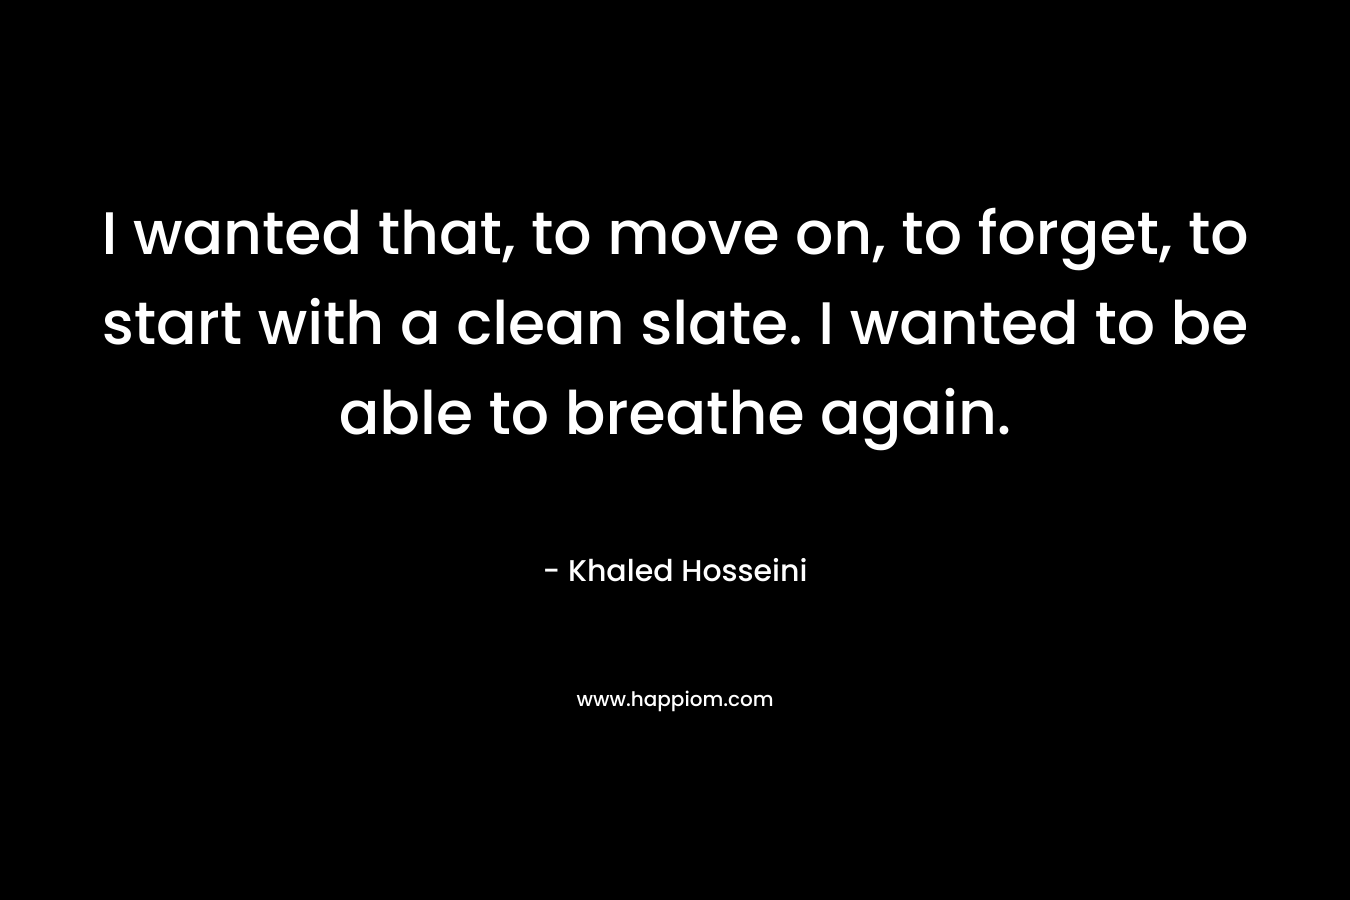 I wanted that, to move on, to forget, to start with a clean slate. I wanted to be able to breathe again. – Khaled Hosseini